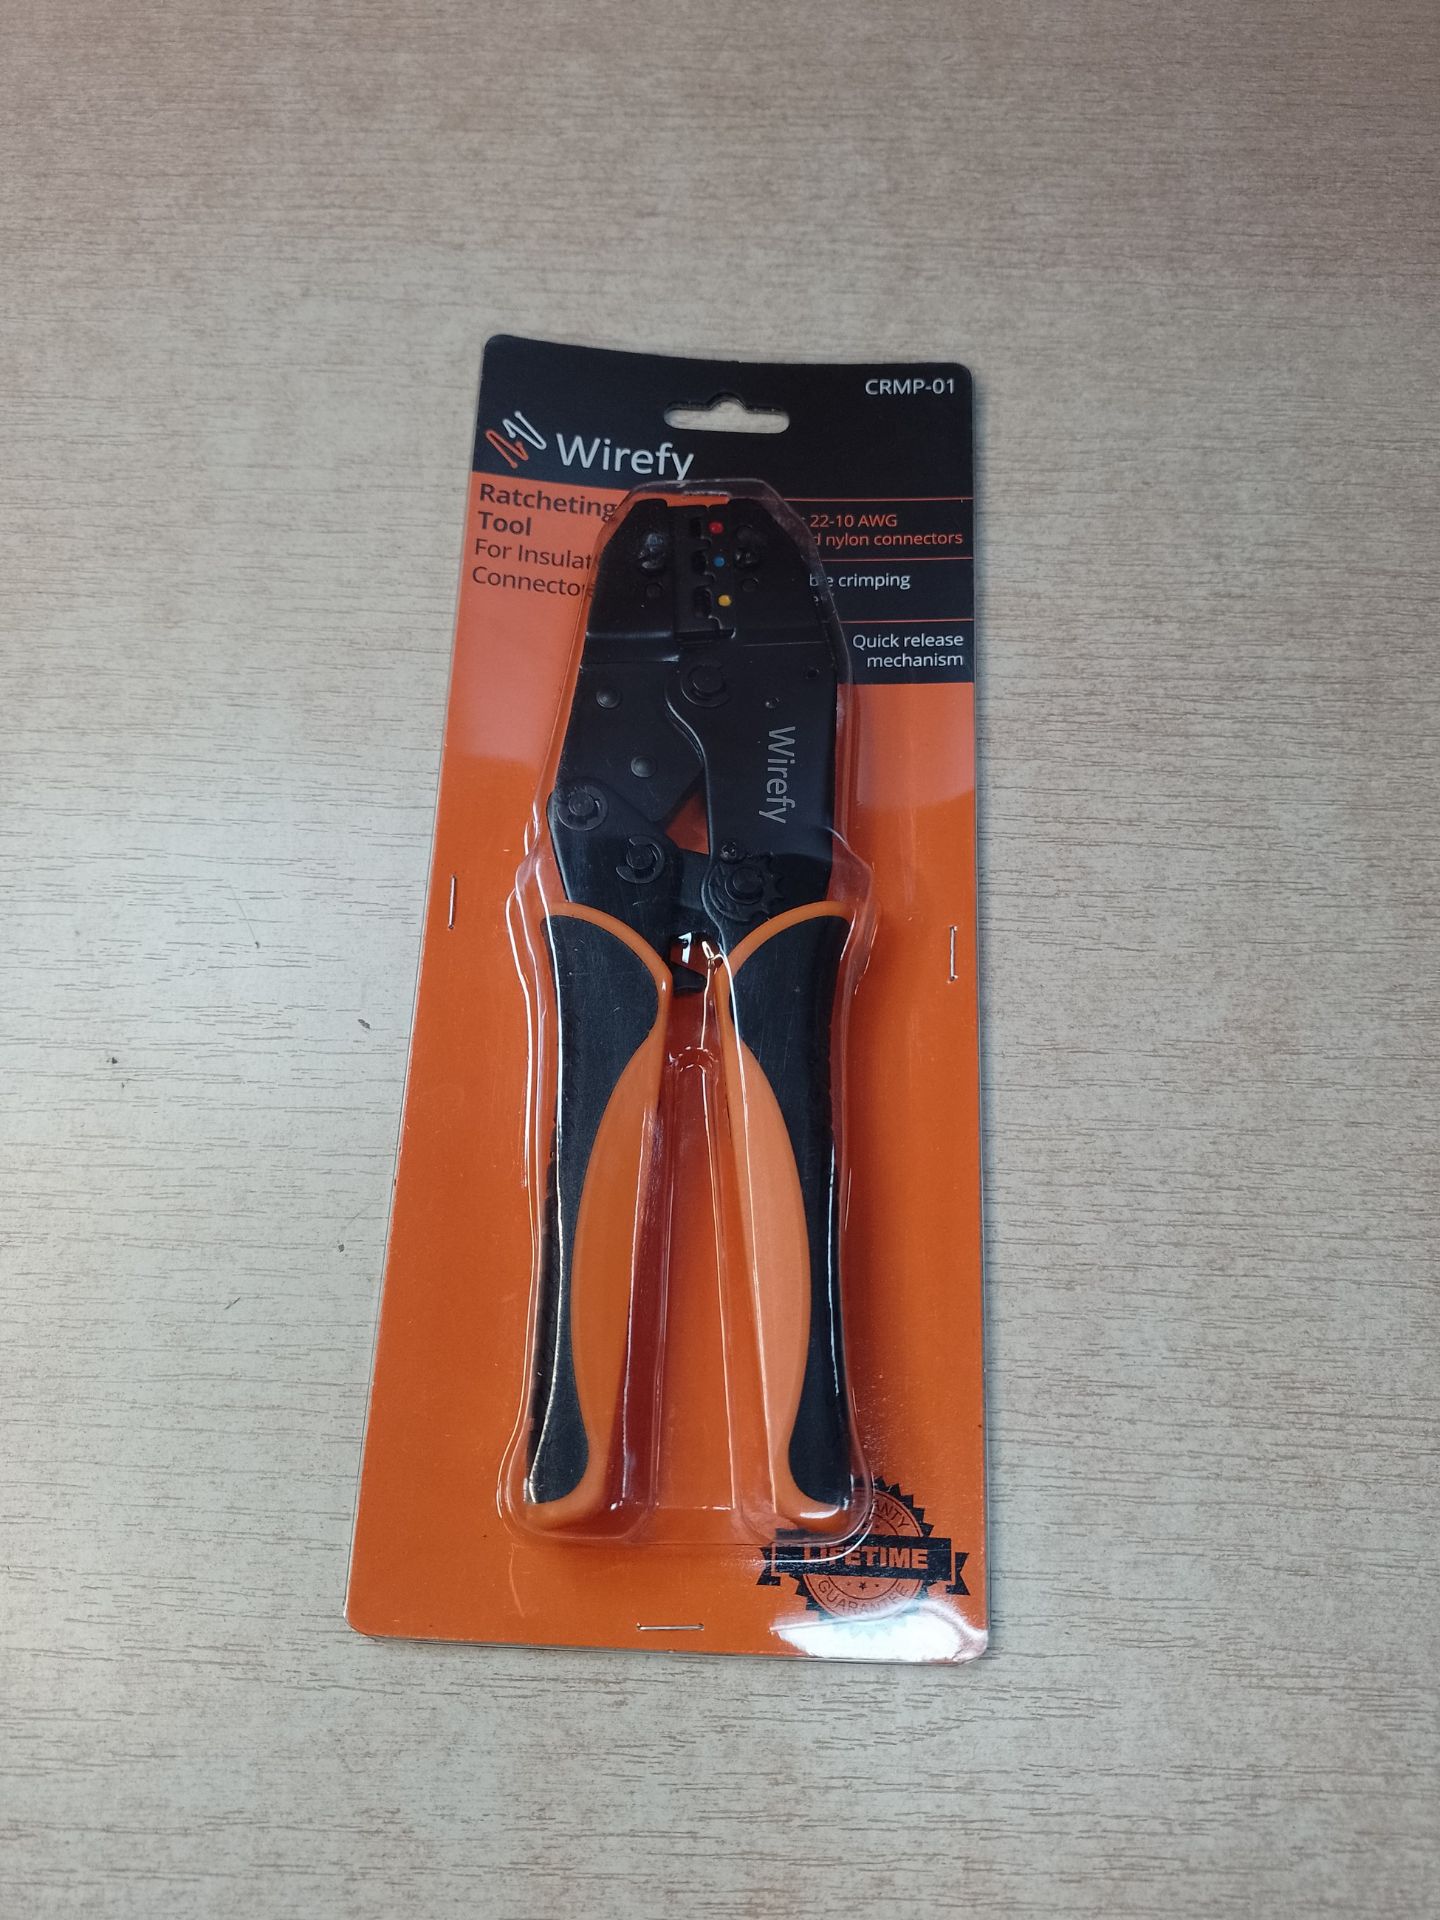 RRP £22.35 Crimping Tool for Insulated Electrical Connectors - Image 2 of 2